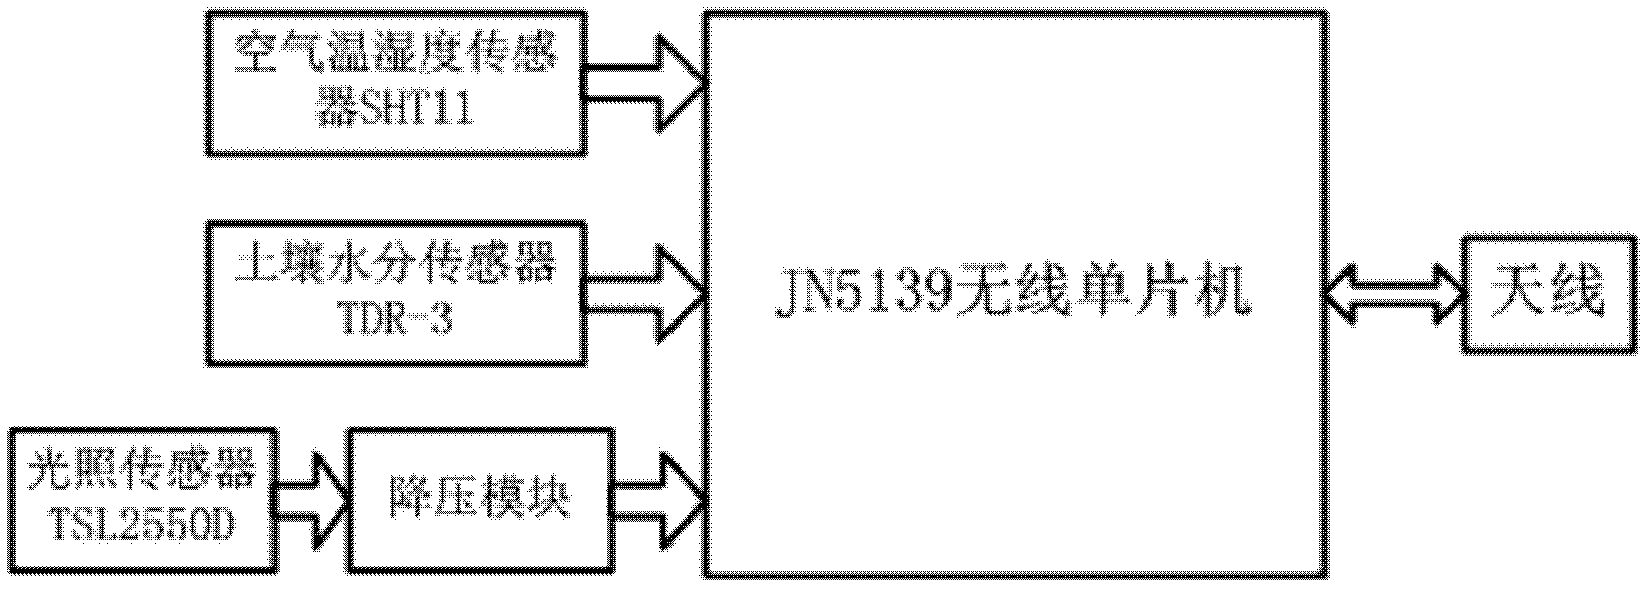 Remote variable frequency irrigation monitoring system based on ZigBee and general packet radio service (GPRS)